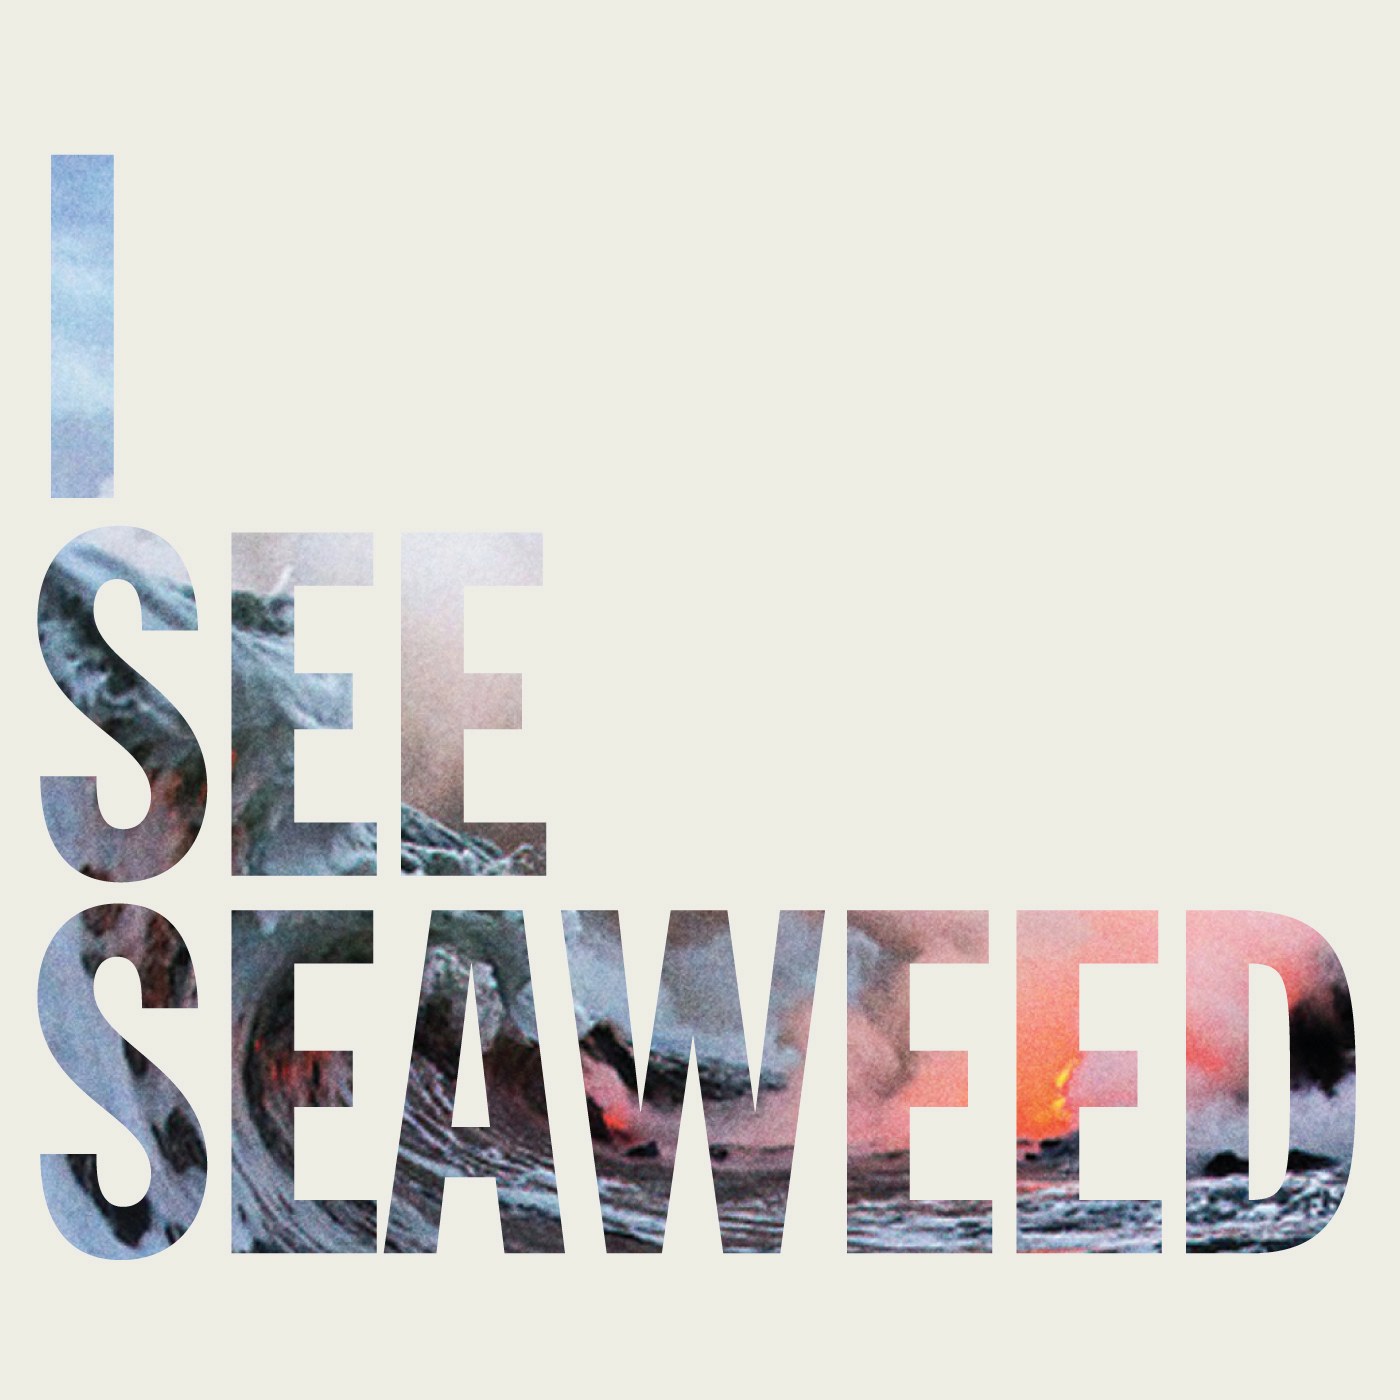 Some thoughts about I See Seaweed by The Drones - by 